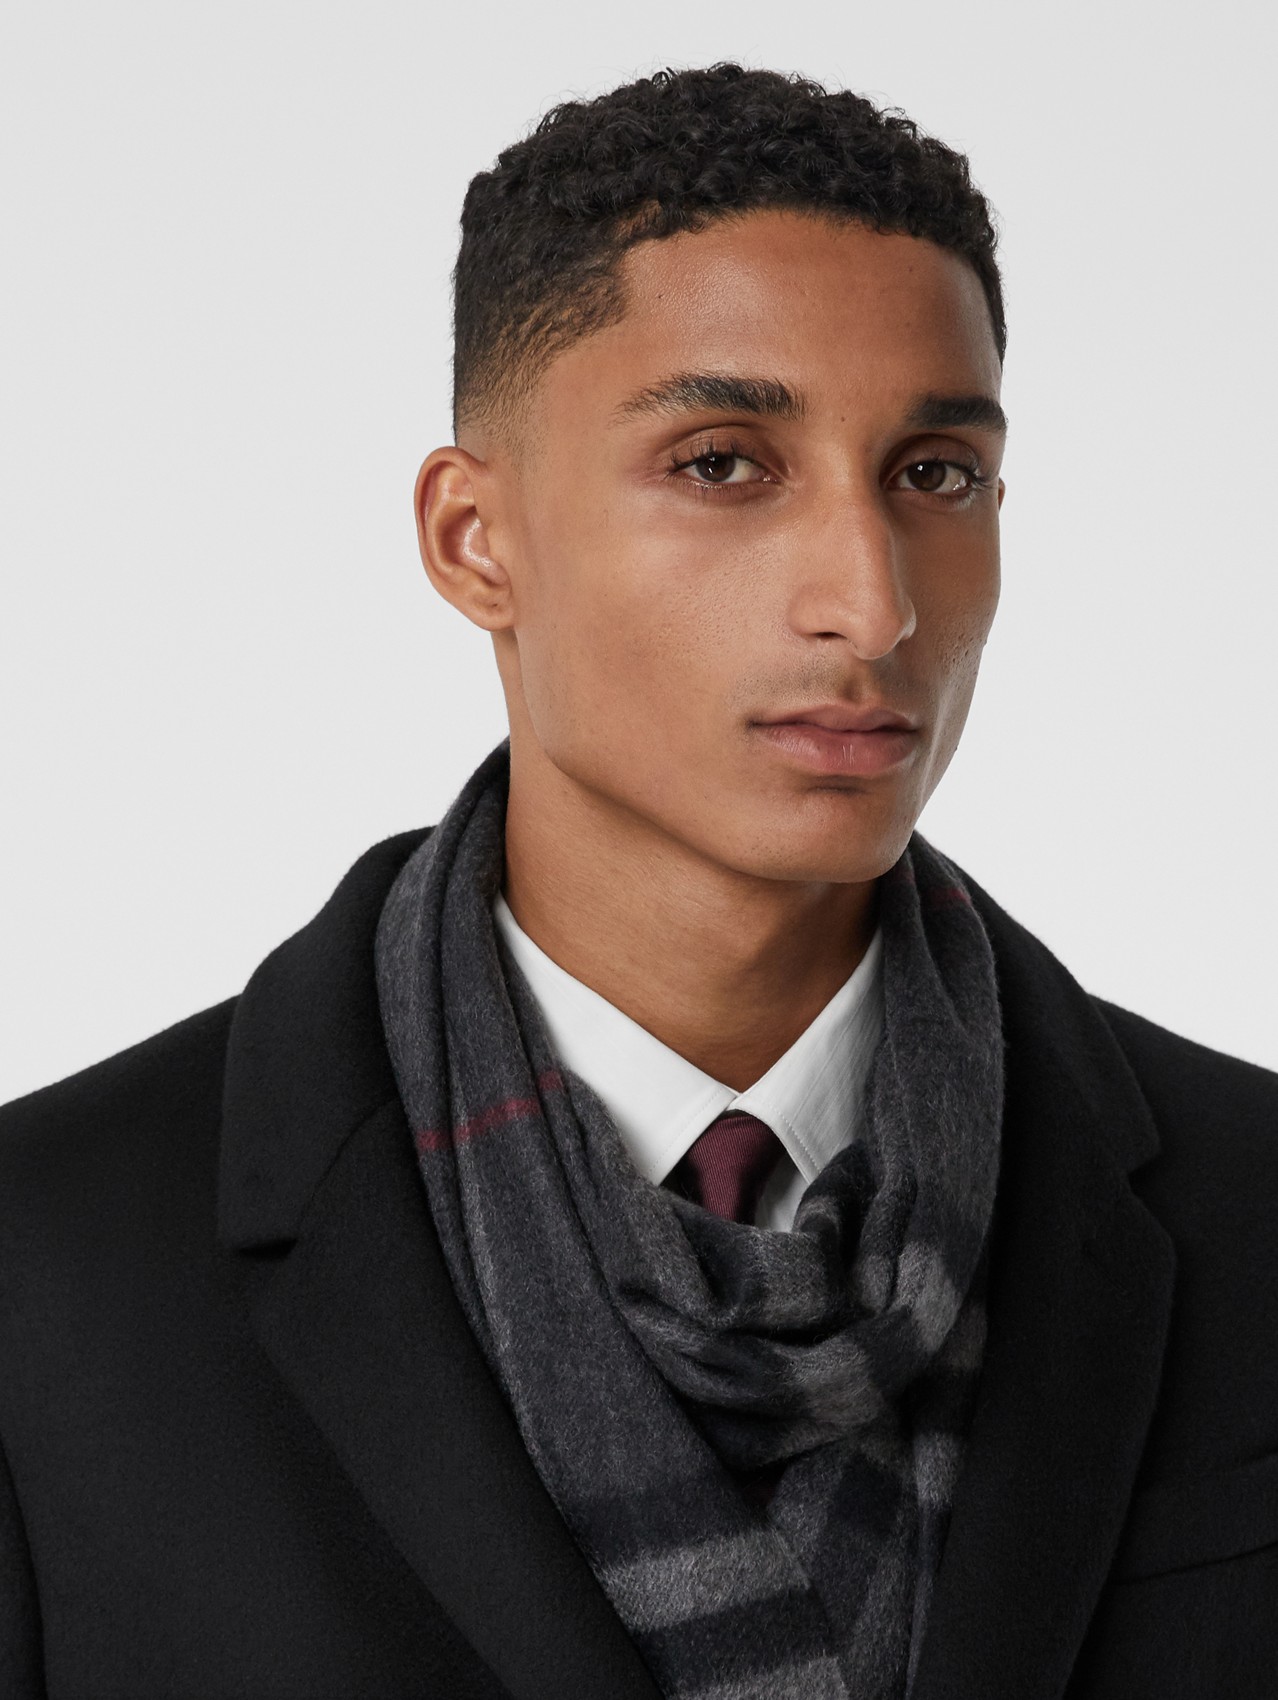 The Classic Check Cashmere Scarf in Charcoal